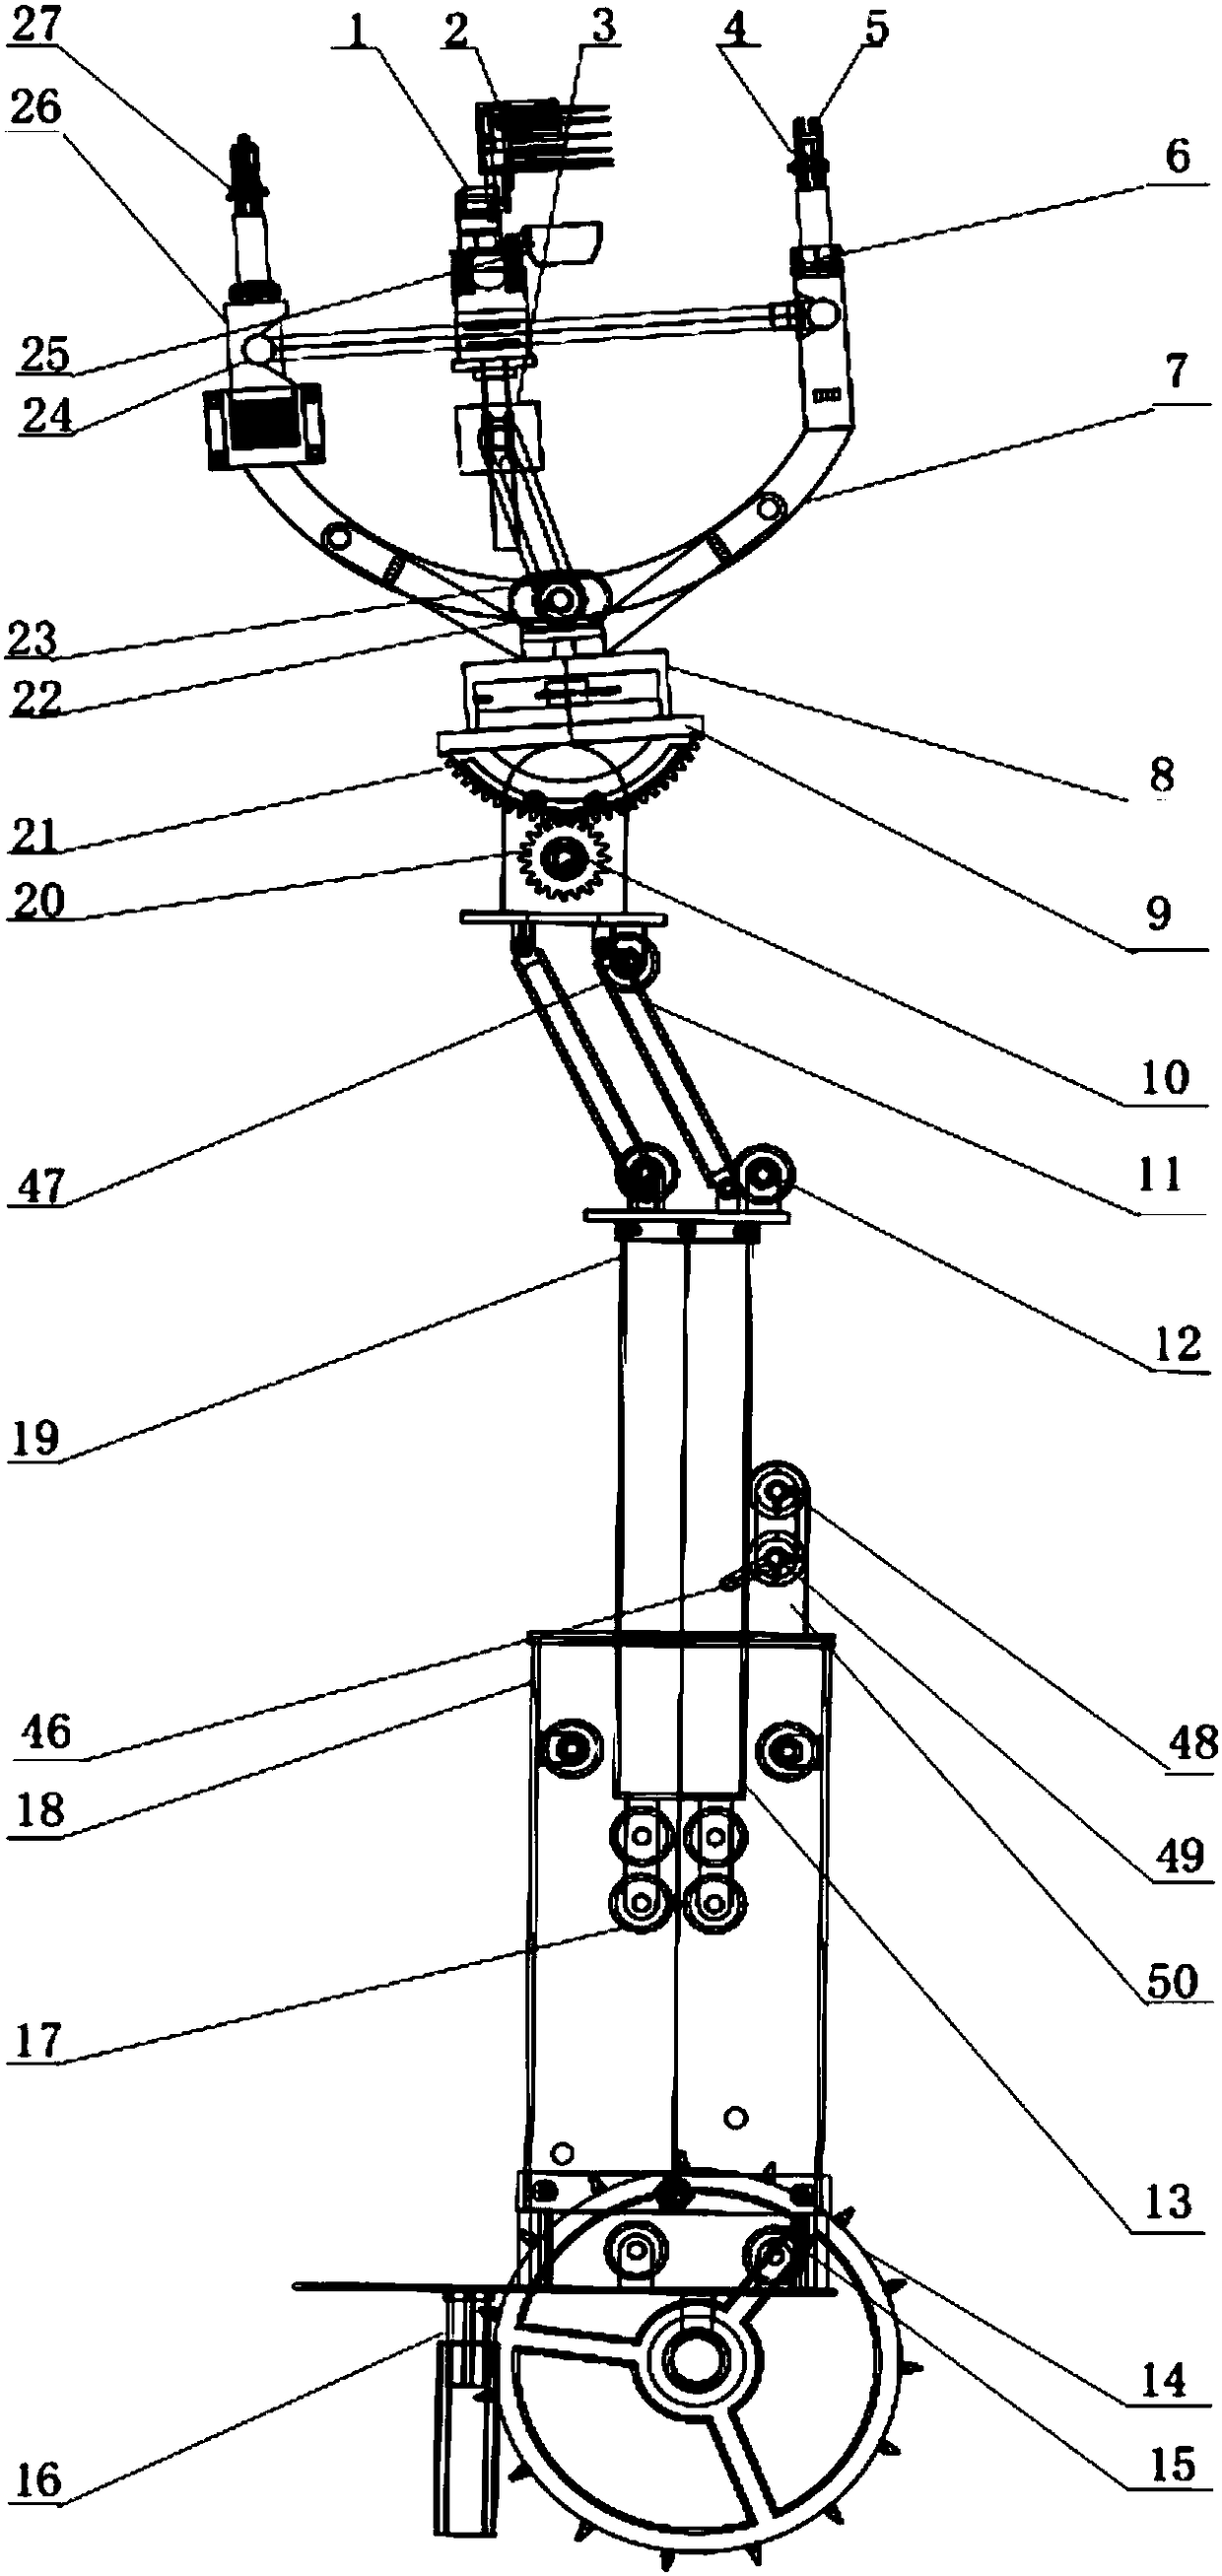 Annular double-cutter semi-automatic cherry picking machine